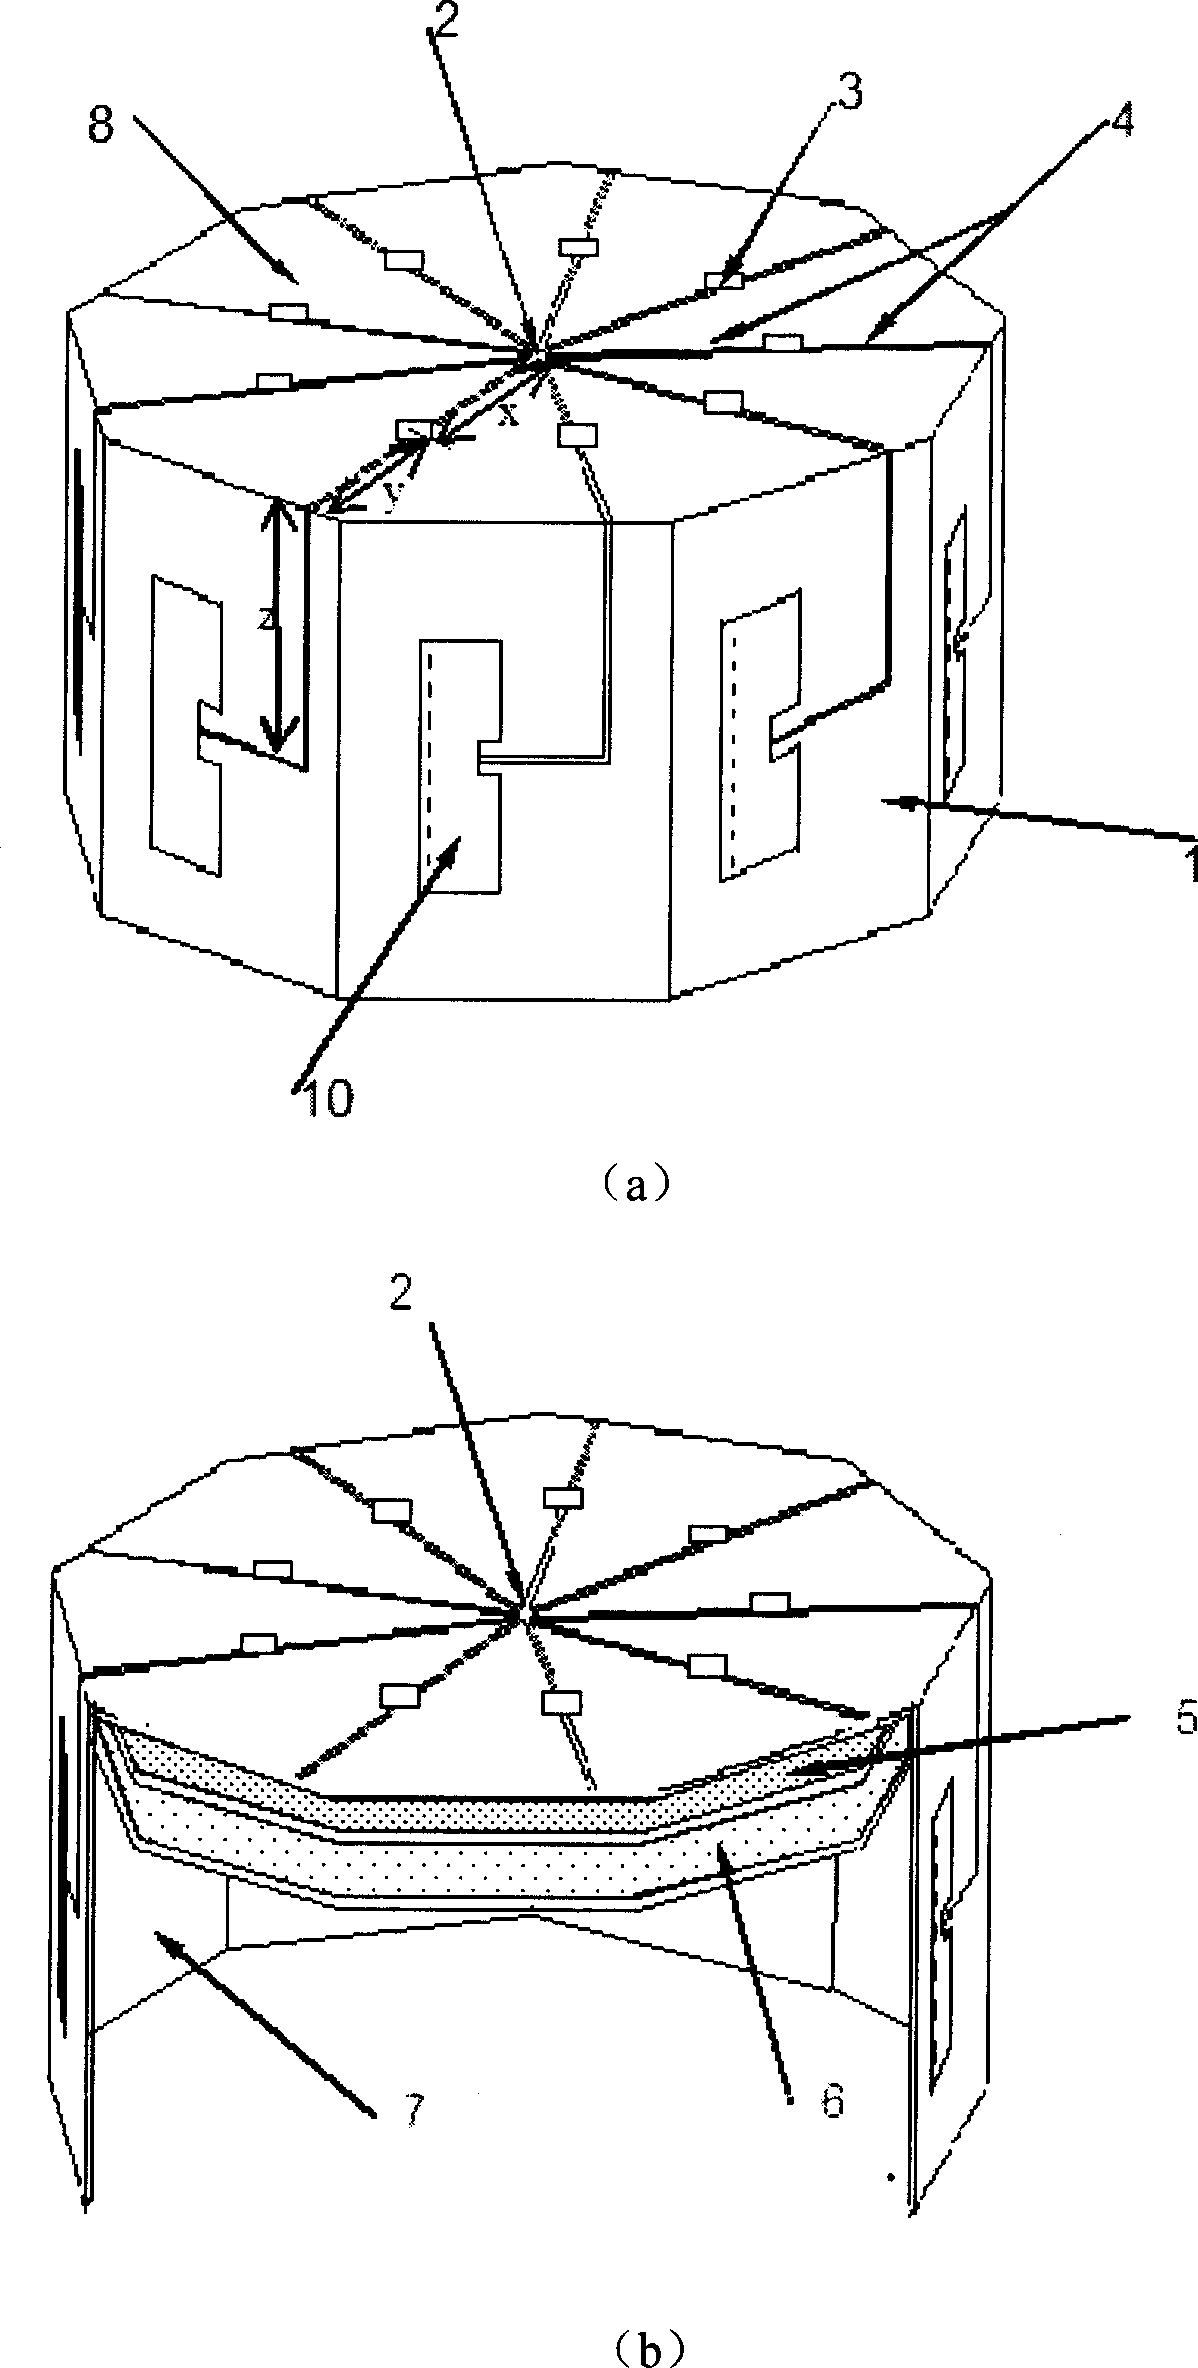 Beam forming and switching method based on regular polyhedron intelligent antenna assembly